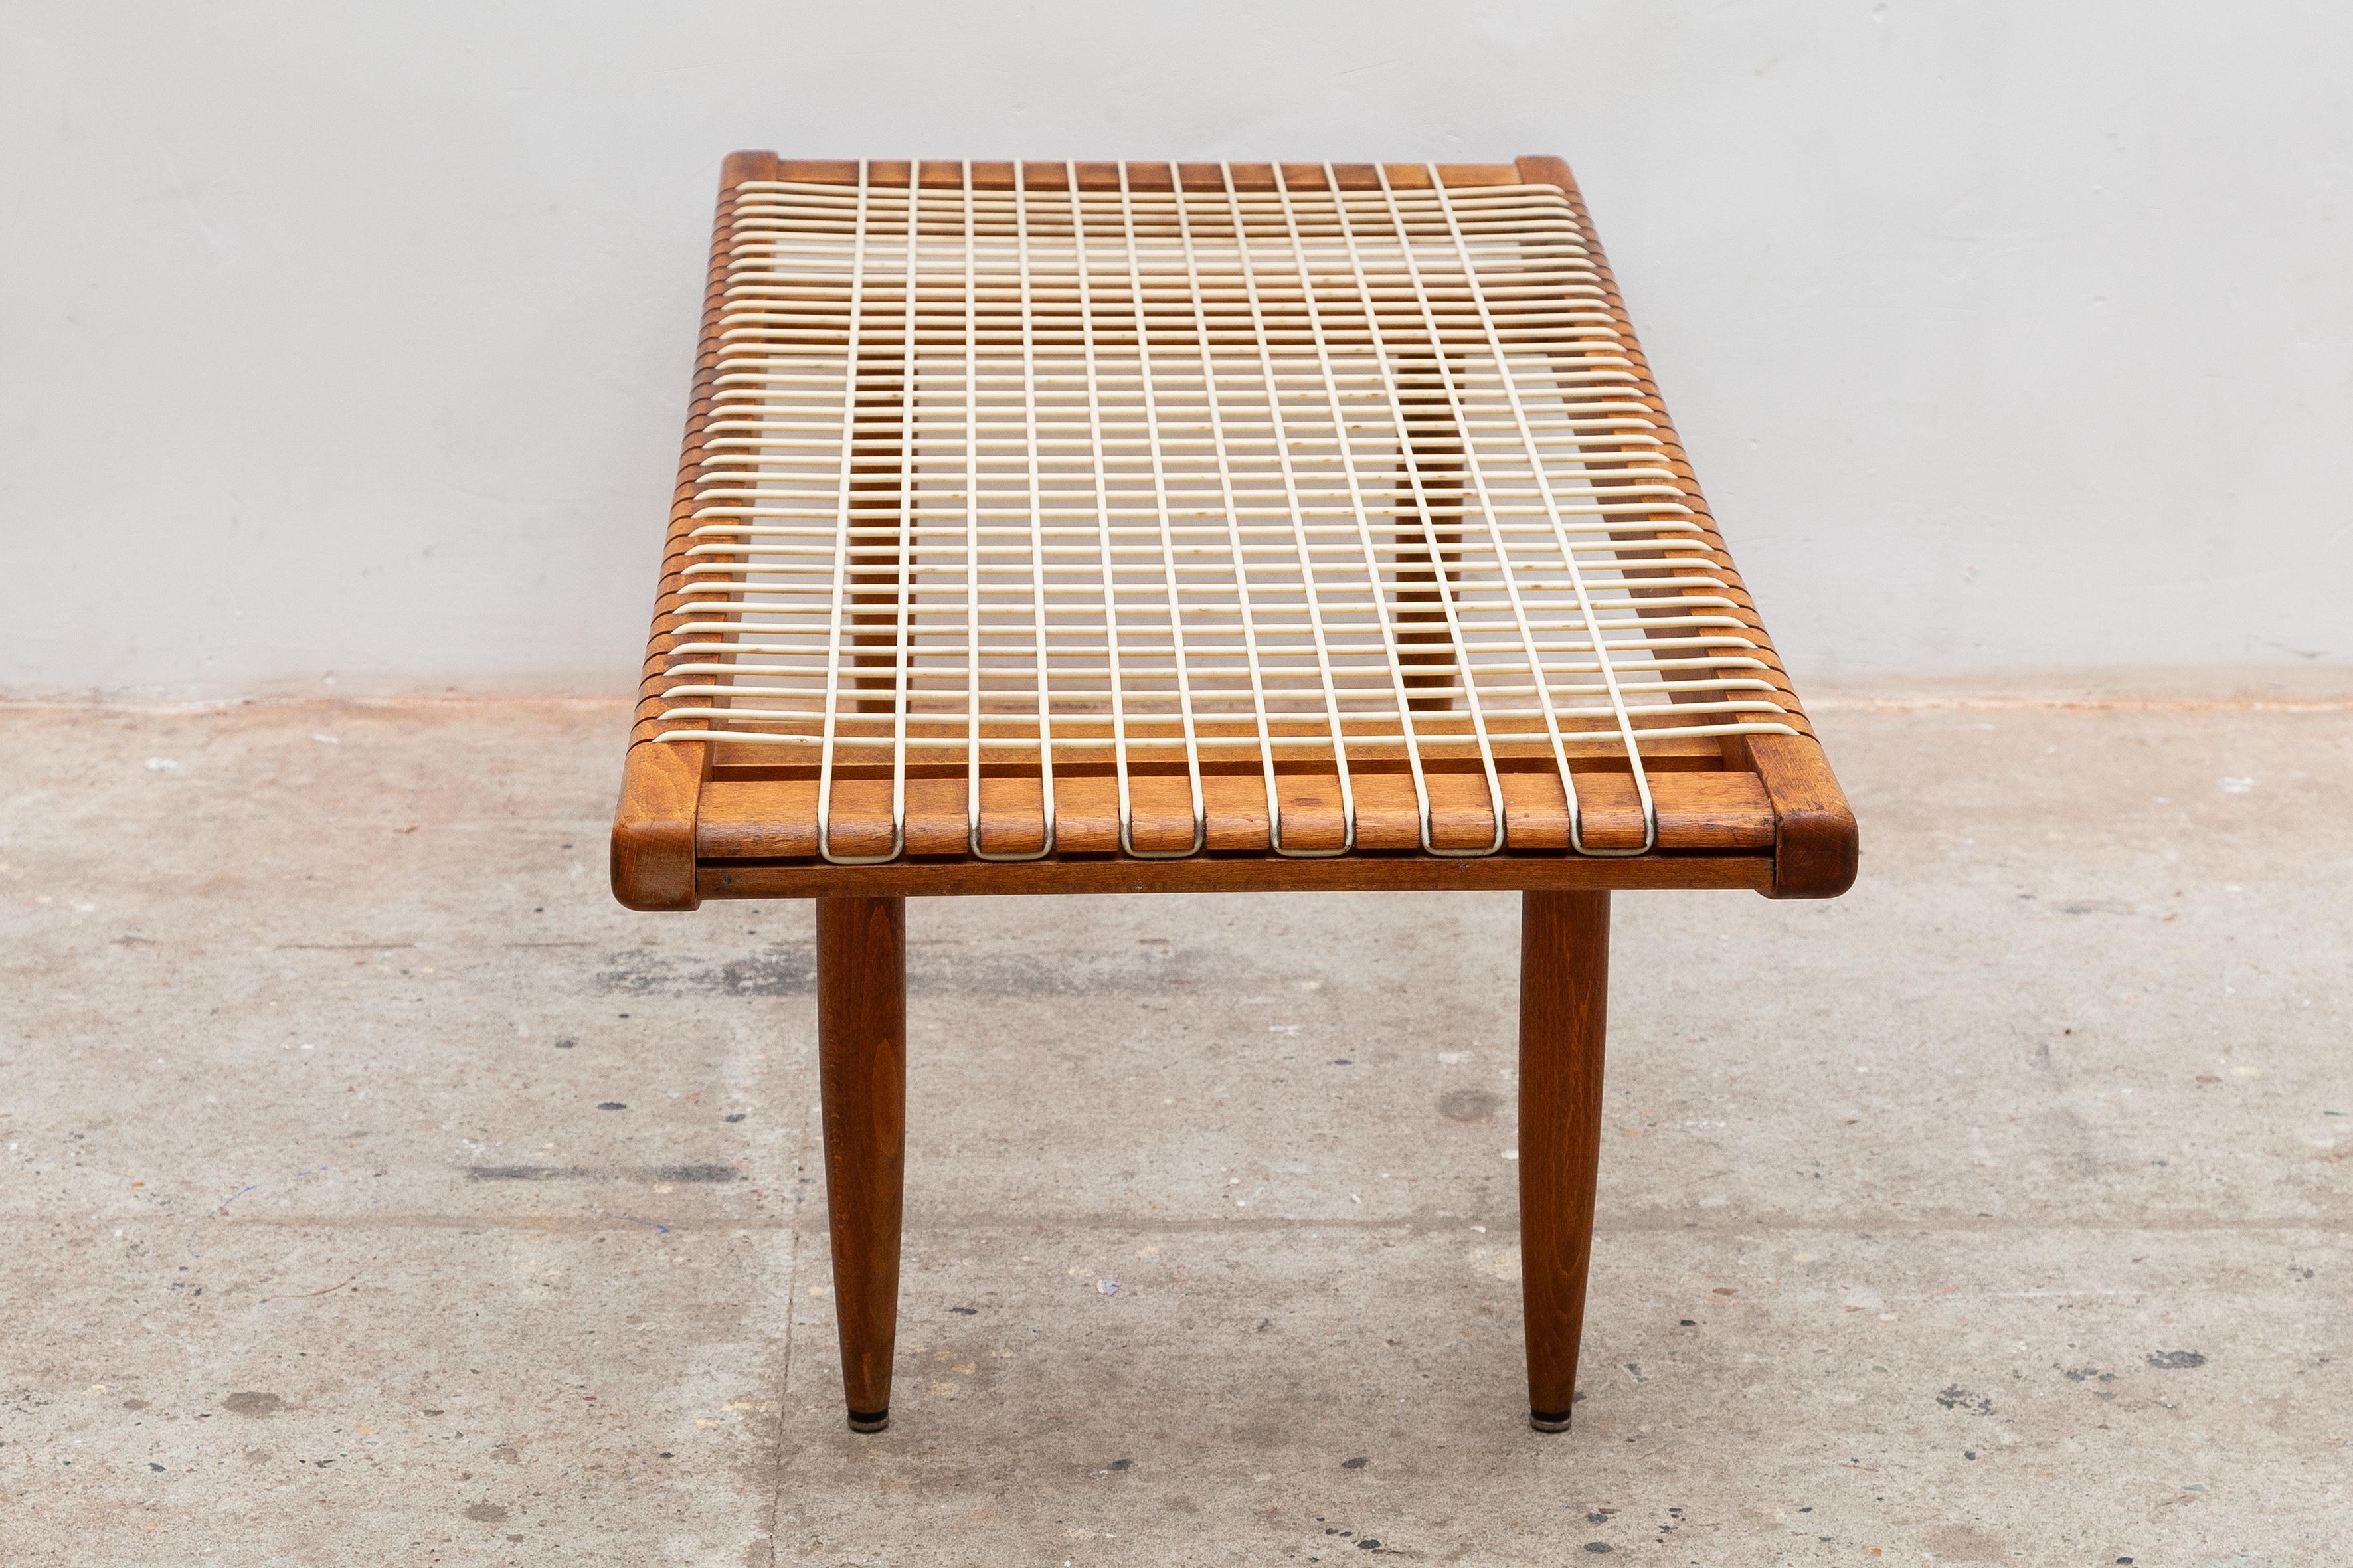 Hand-Crafted Rare Teak and Cord Coffee-Table by Georges Tigien, for Pradera, 1950s, France For Sale